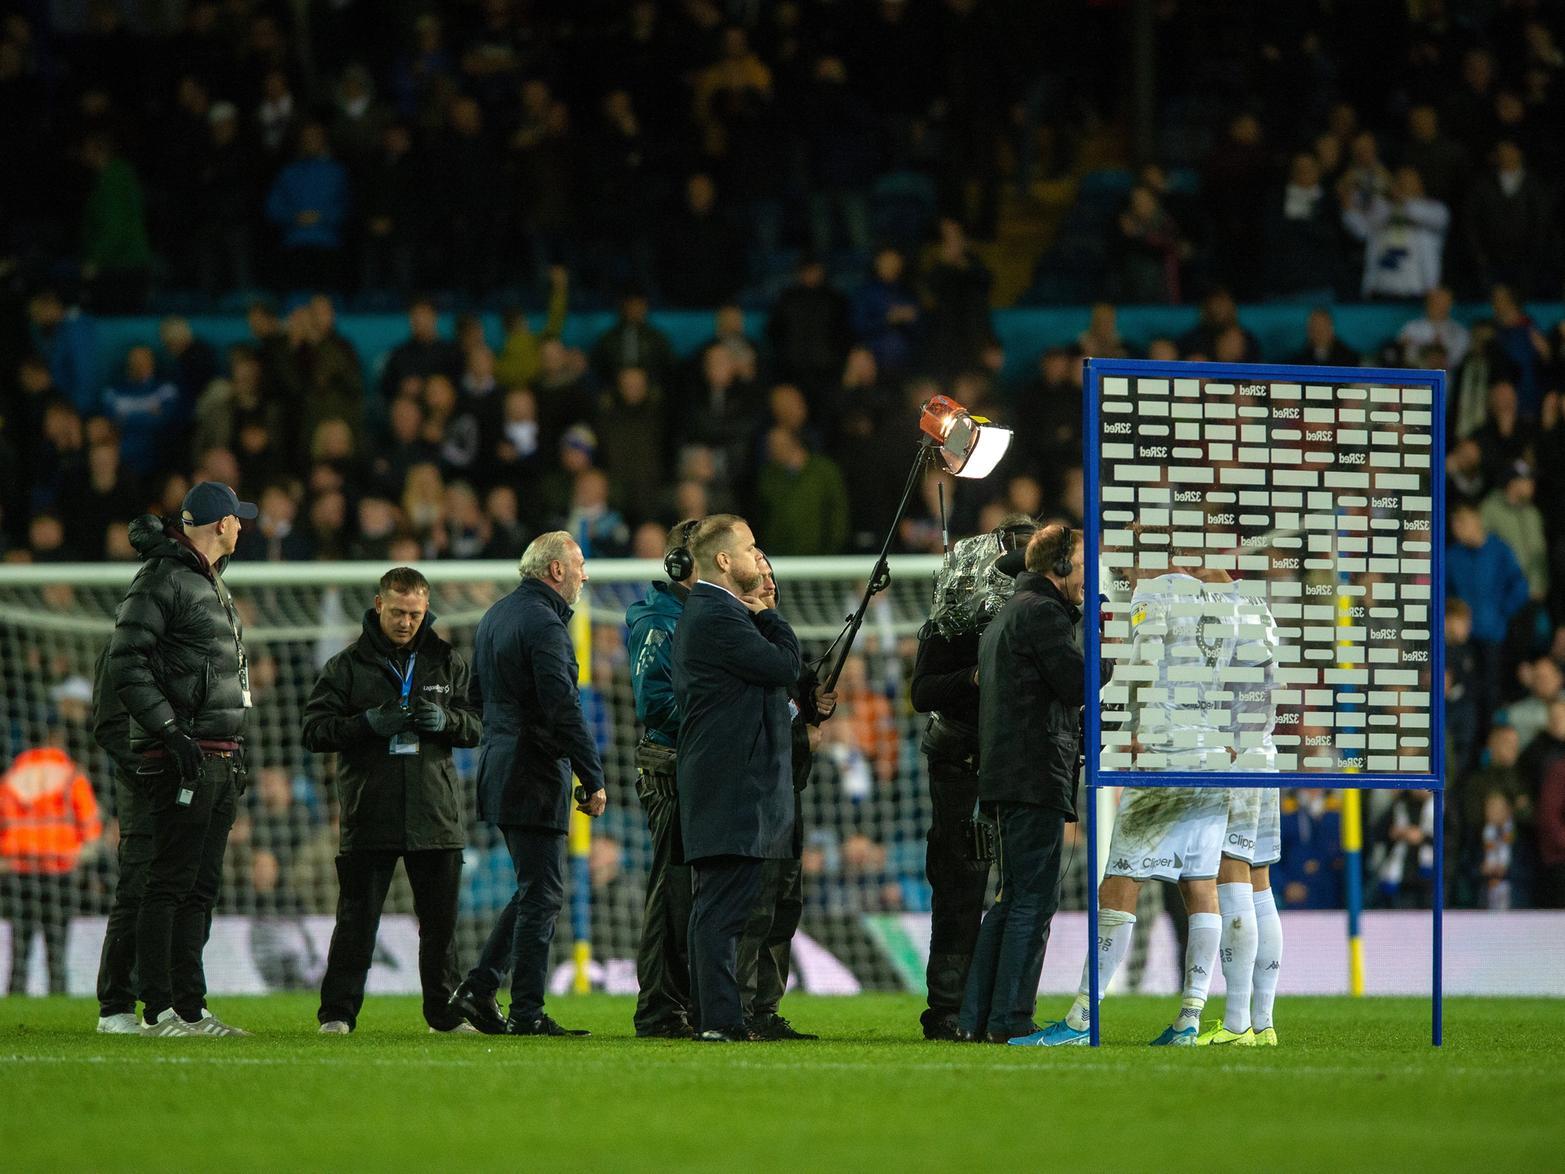 How many times have Leeds United played in front of the Sky Sports cameras in the Championship this season?